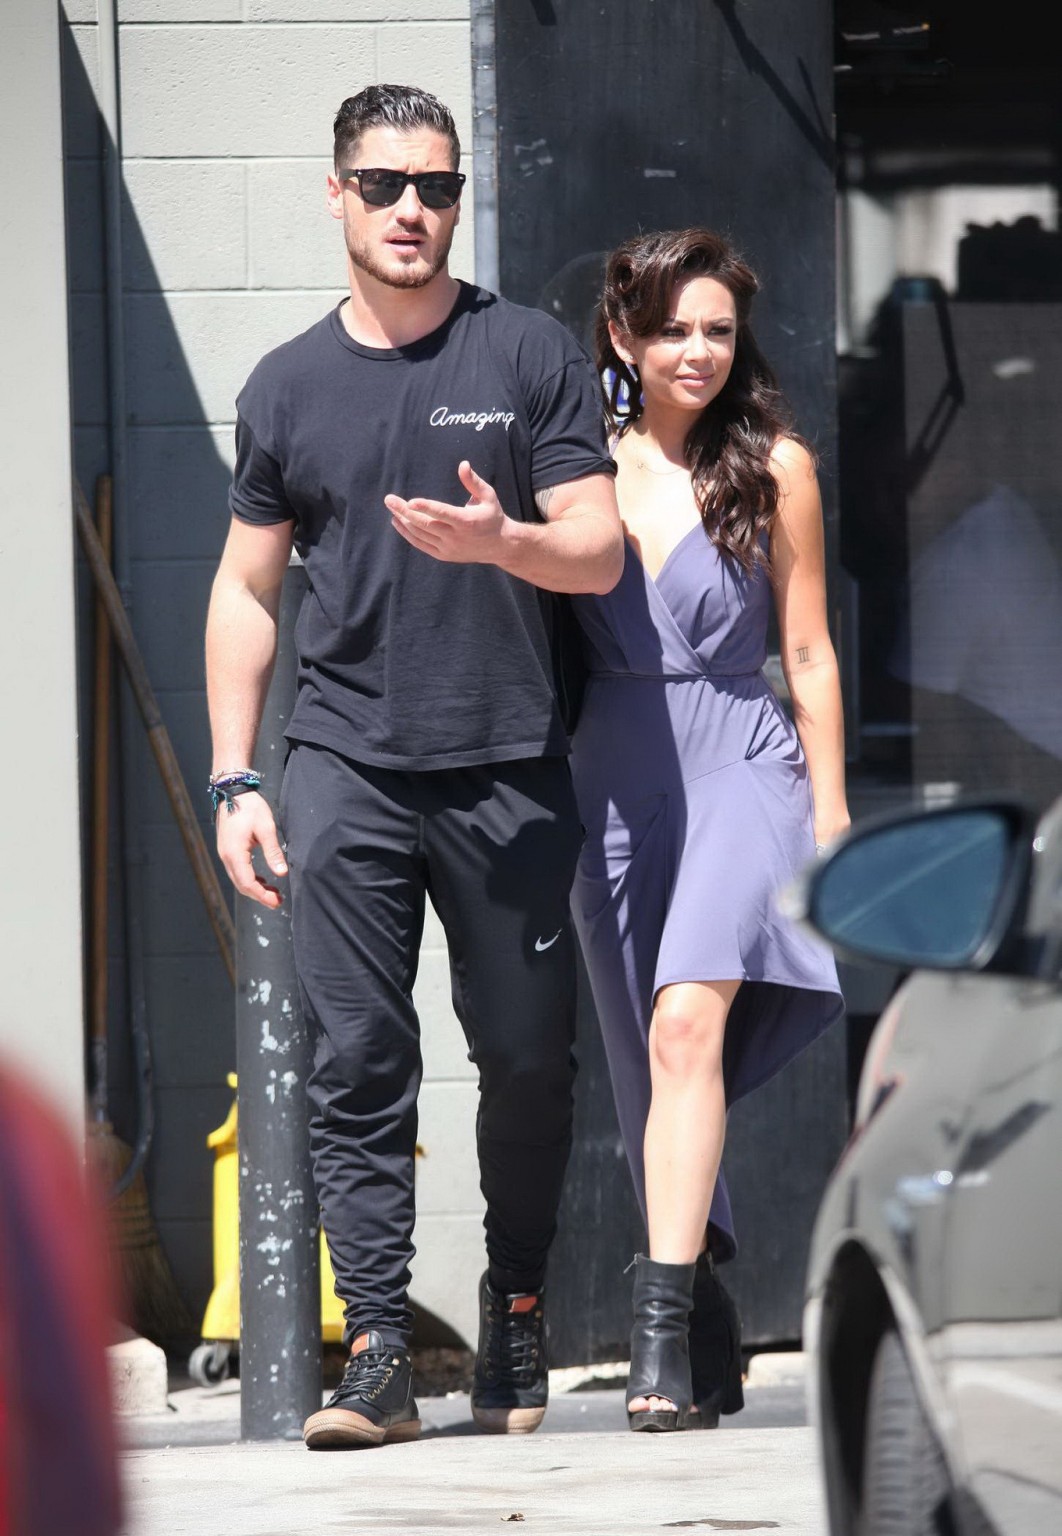 Janel Parrish cleavy and leggy in a short purple dress leaving DWTS Rehearsal in #75185748